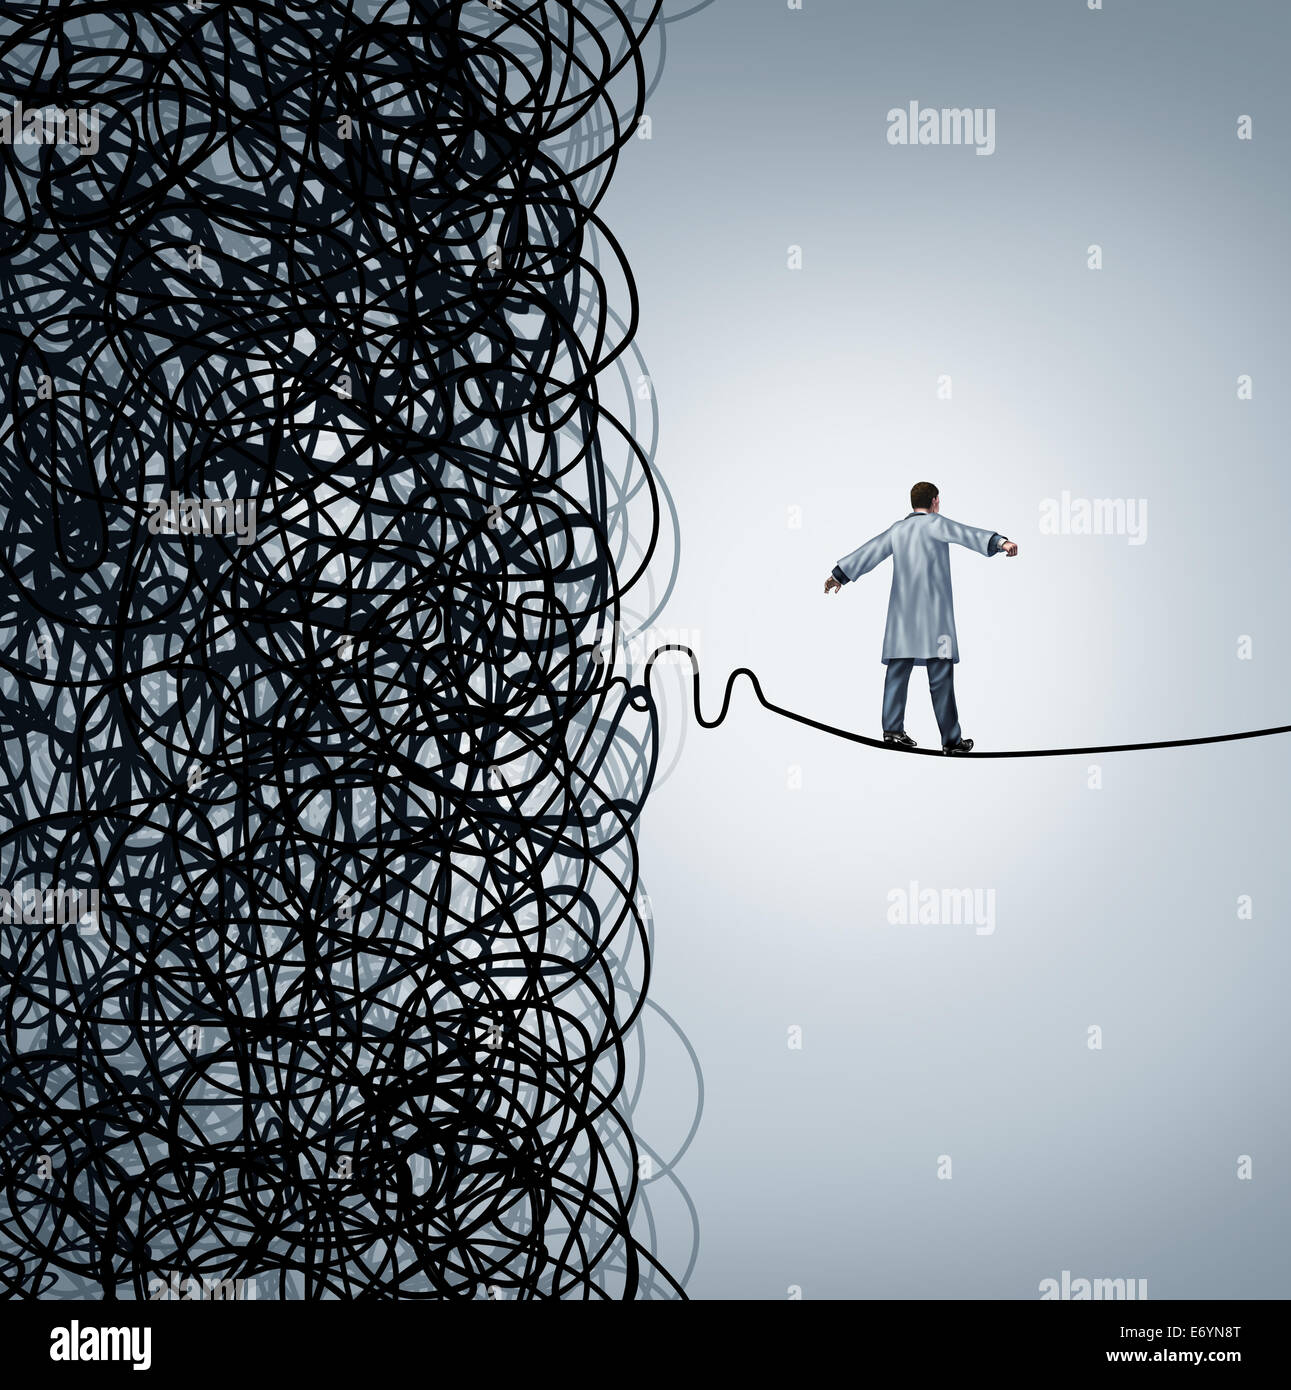 Medical crisis management with a doctor walking on a straight line out of a confused mess of tangled wires as a health care concept  for a hospital manager working to optimicze efficiency for patient wellbeing or finding a cure to disease. Stock Photo